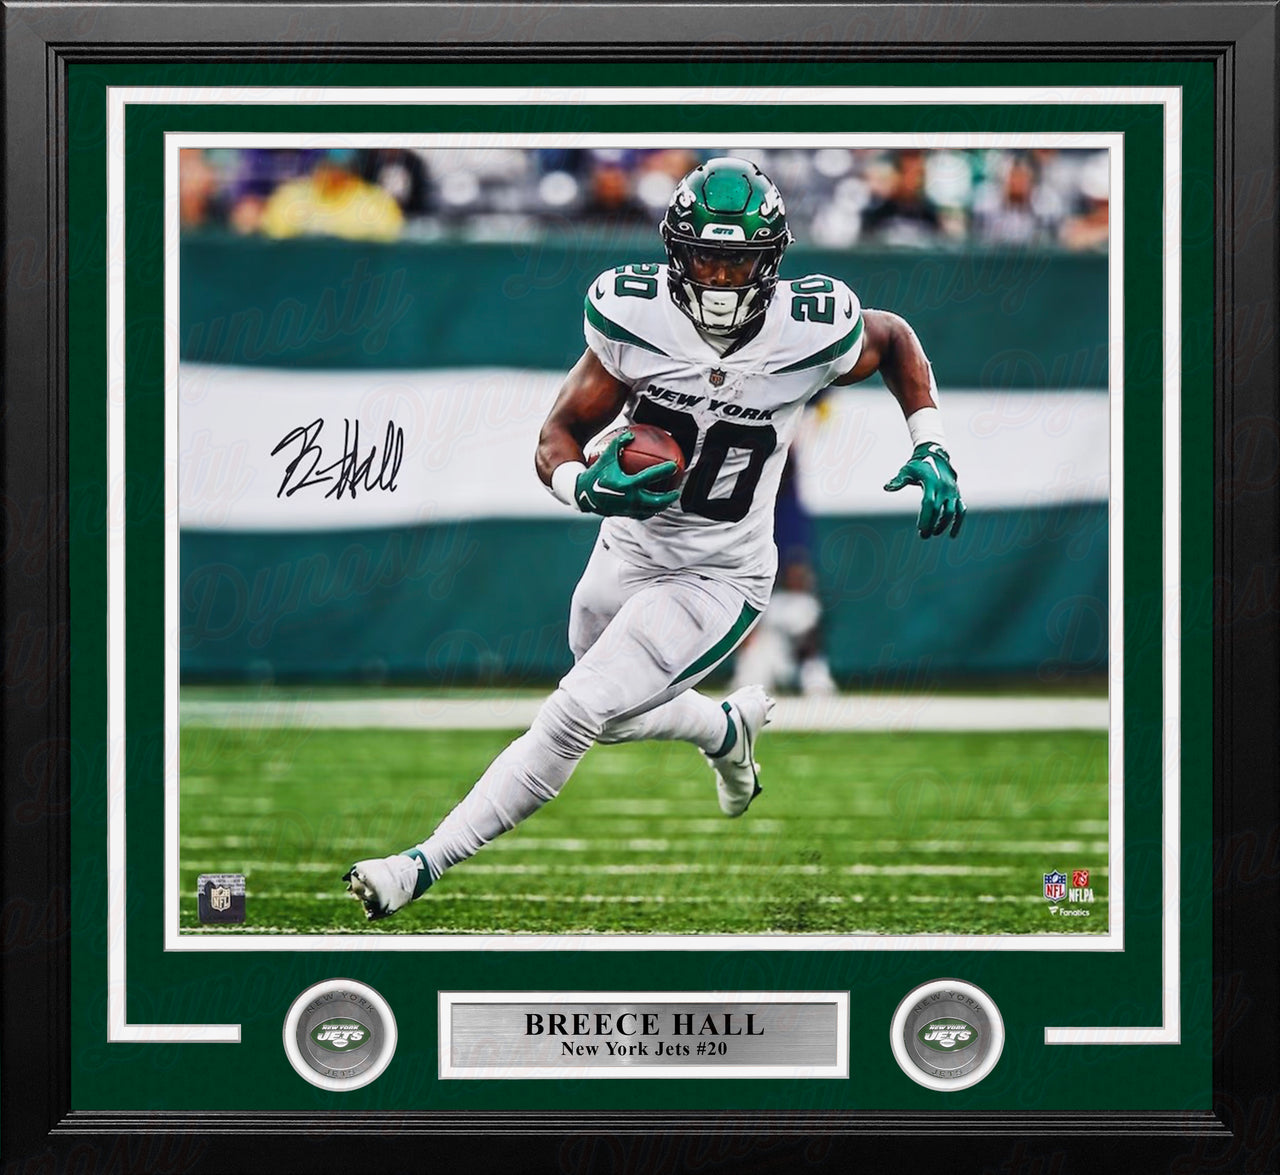 Breece Hall Running Action New York Jets Autographed 16" x 20" Framed Football Photo